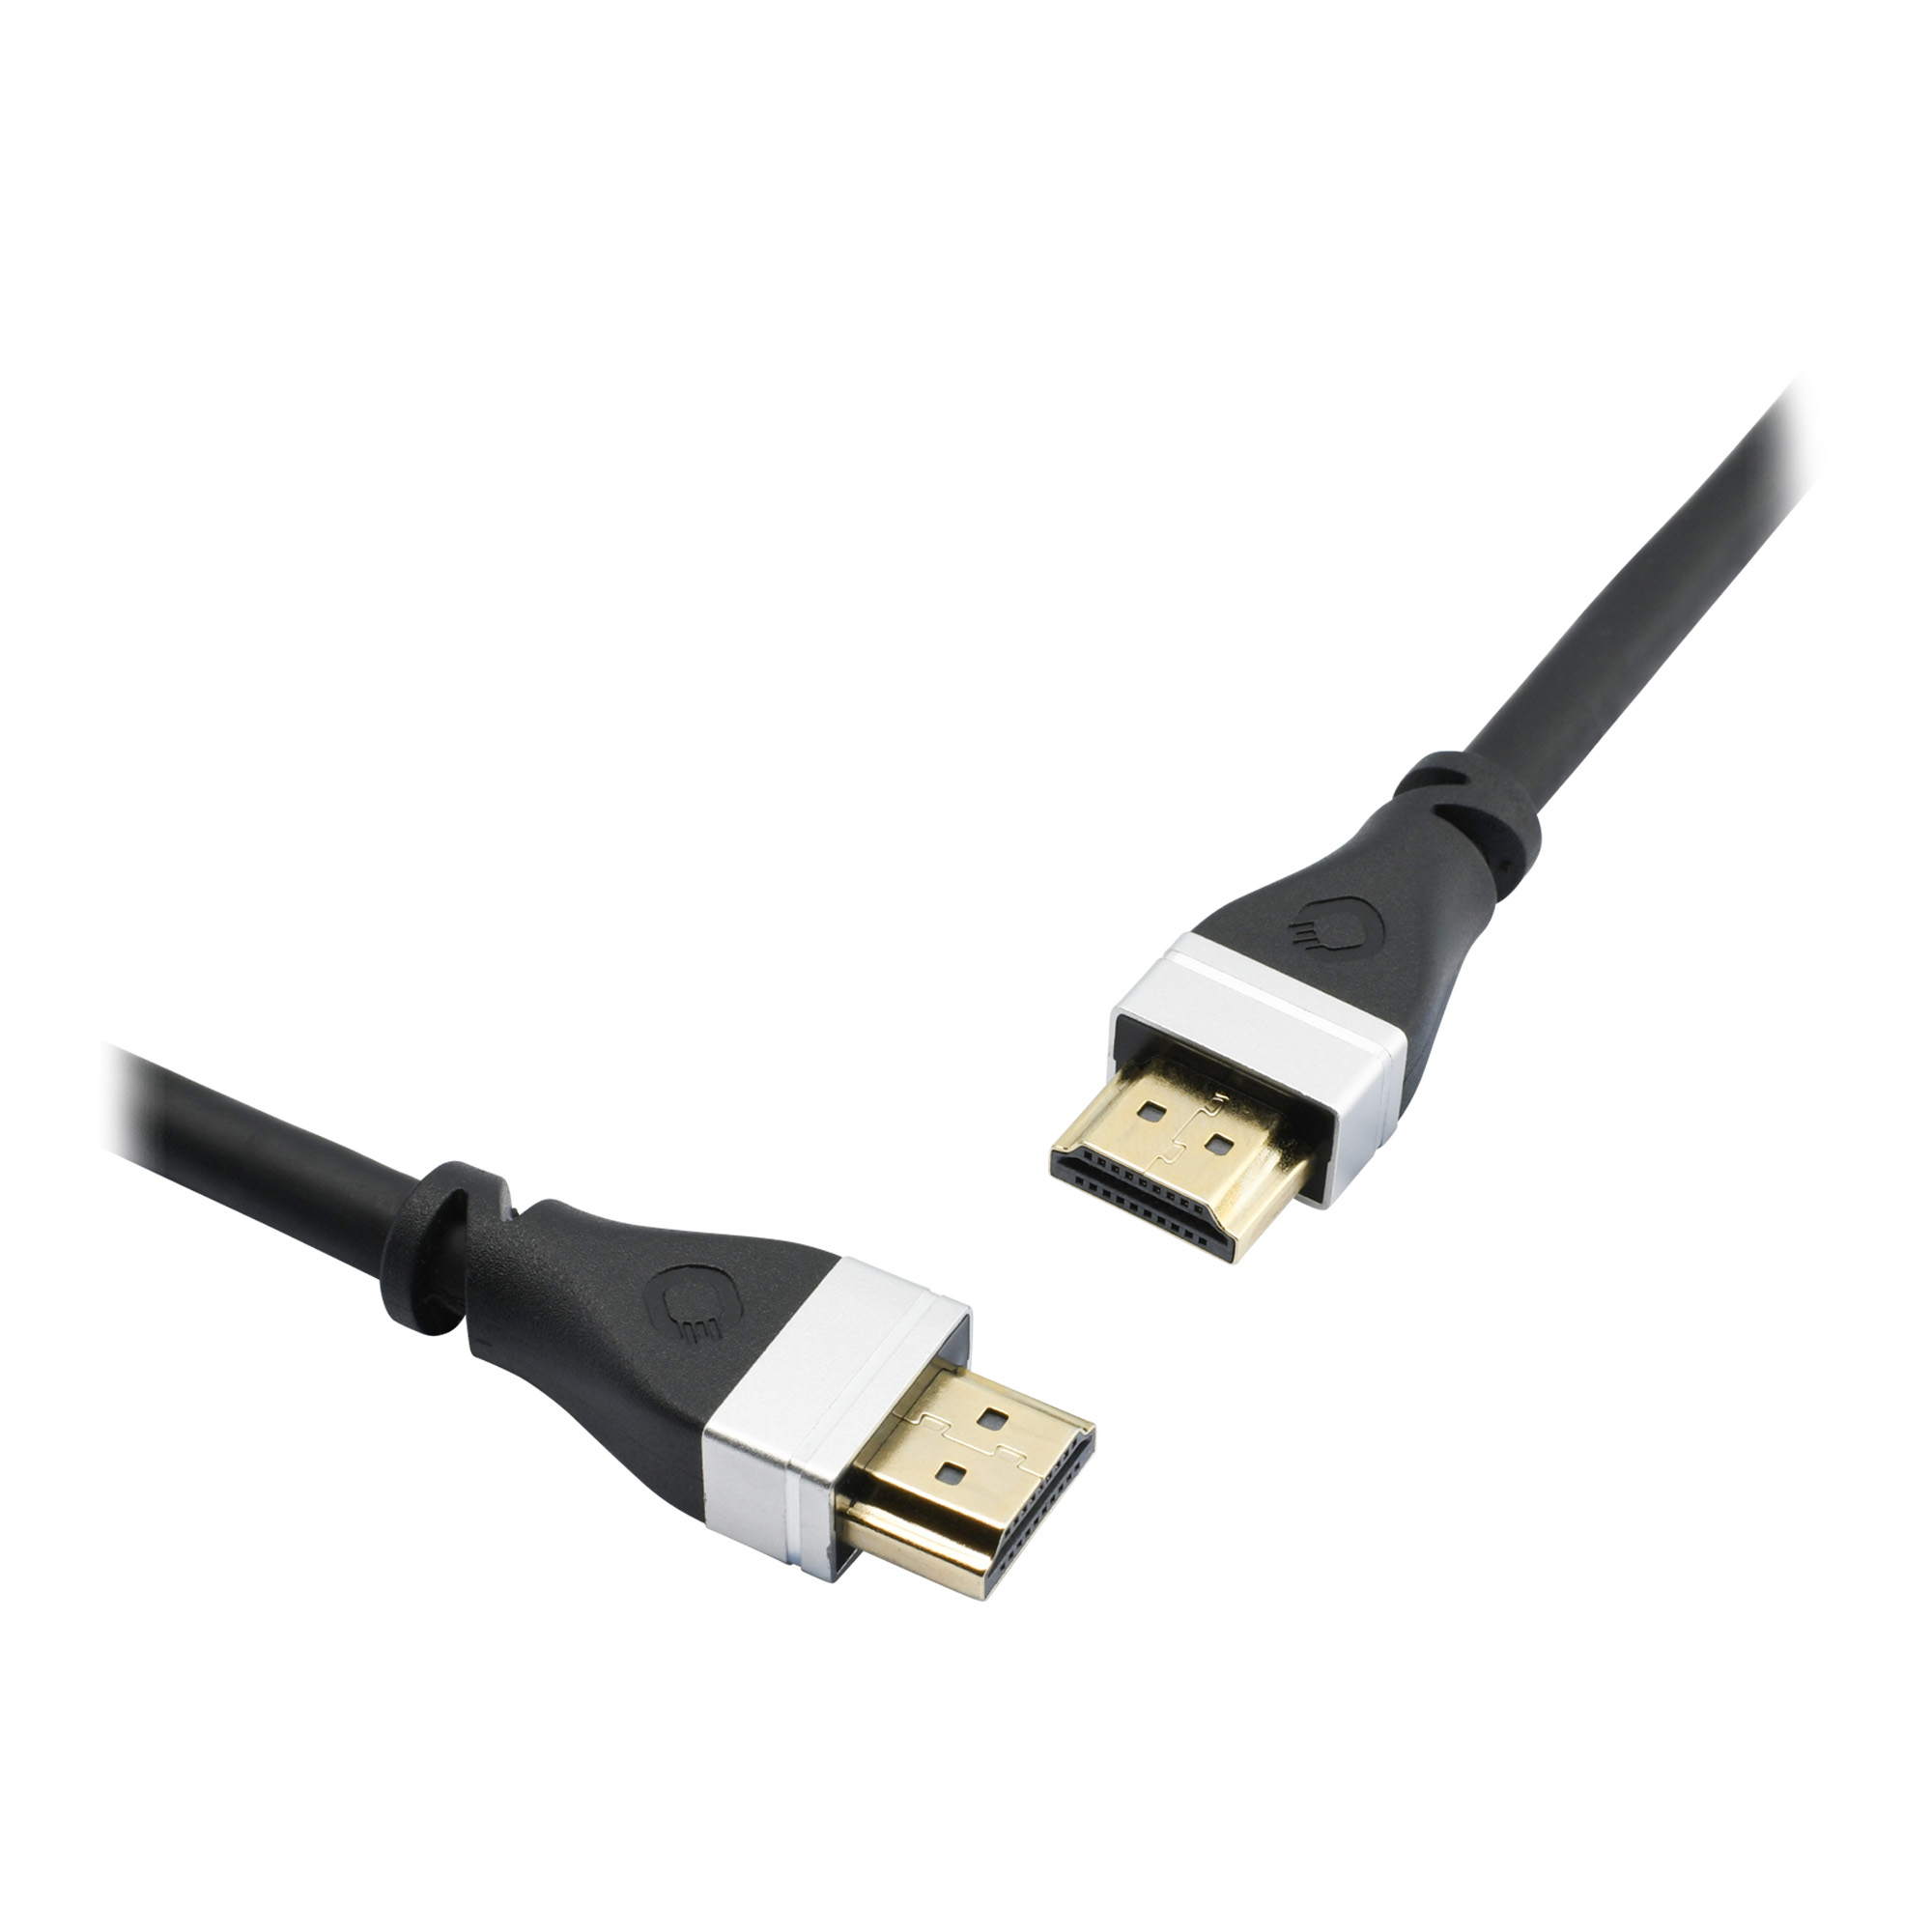 Кабель Oehlbach EXCELLENCE Video Link HDMI 2.1 Cable Black 1.5m - фото 3